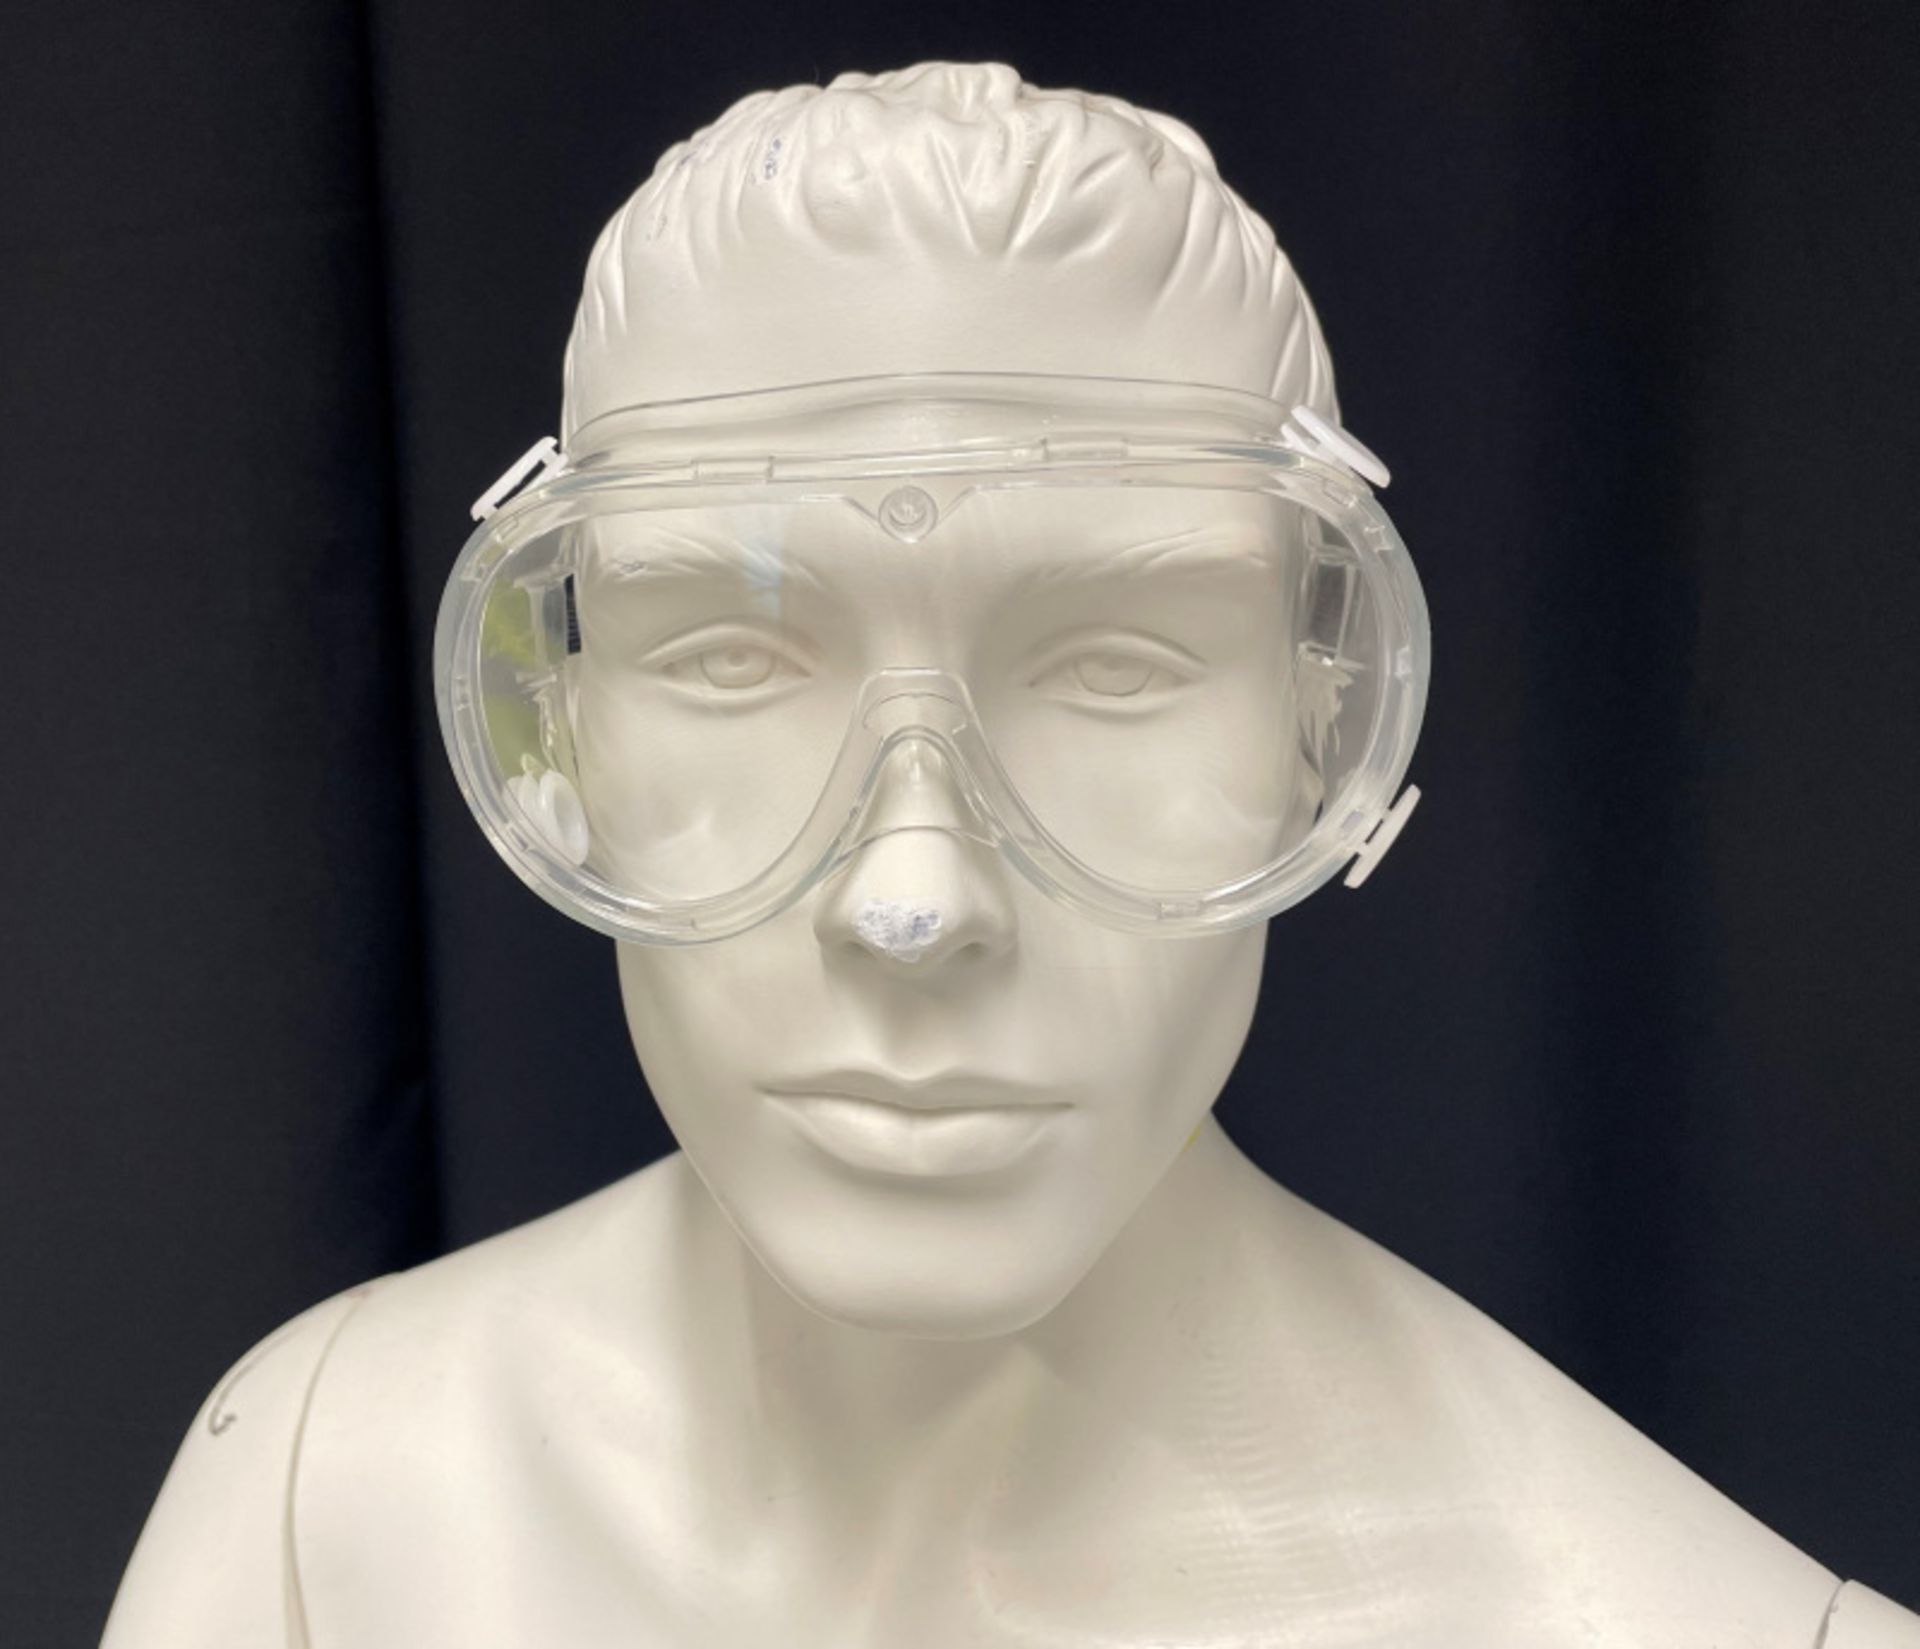 24x pallets of safety goggles - est. total qty 28800 - location LE67 1ND - PPE - Image 2 of 9